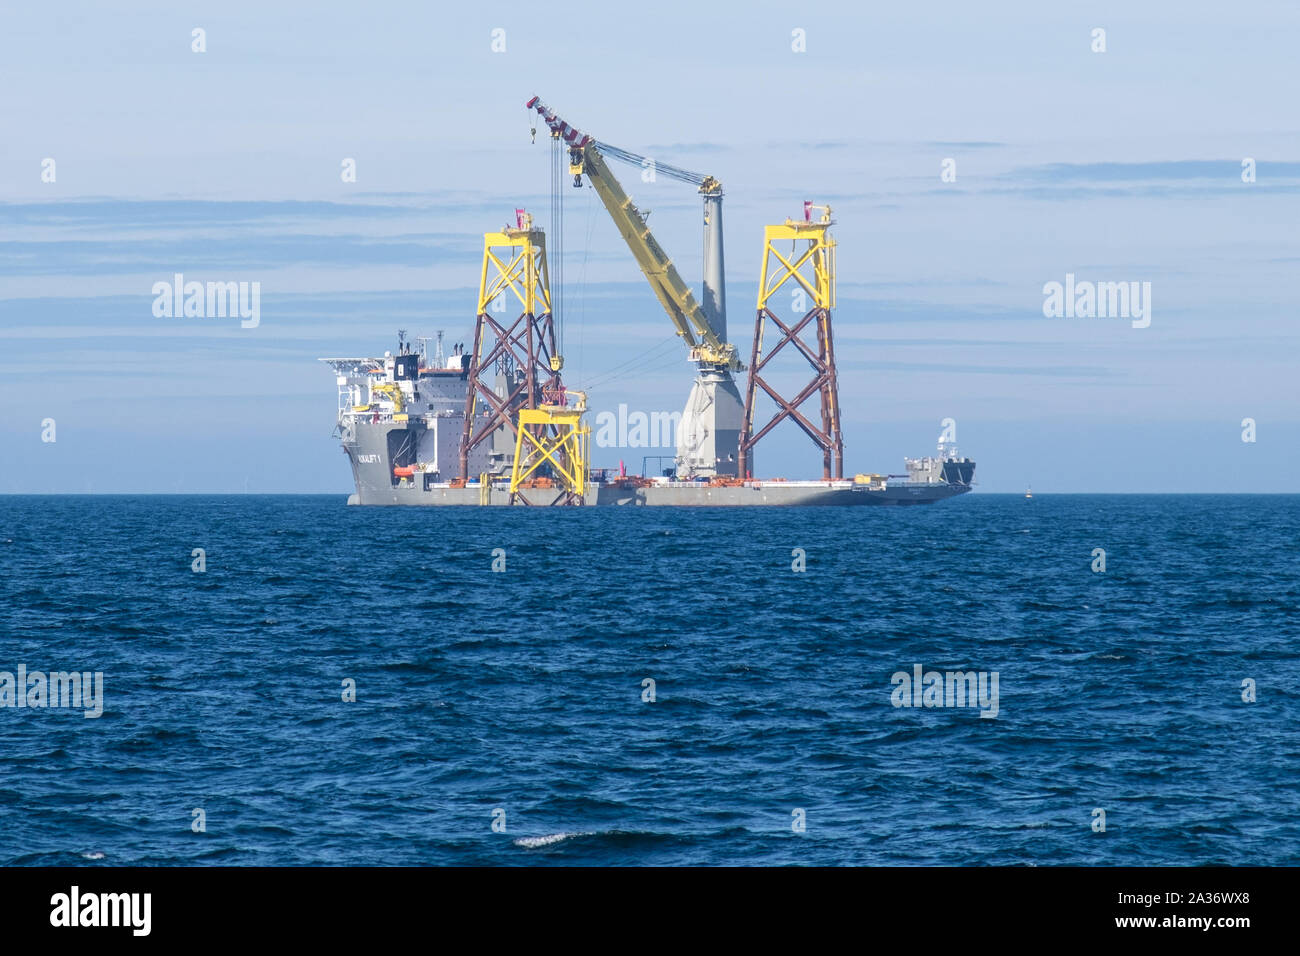 East Anglia ONE Offshore Wind Farm during construction with the heavy-lift construction vessel, Boka Lift, lifting one of the jackets in place Stock Photo